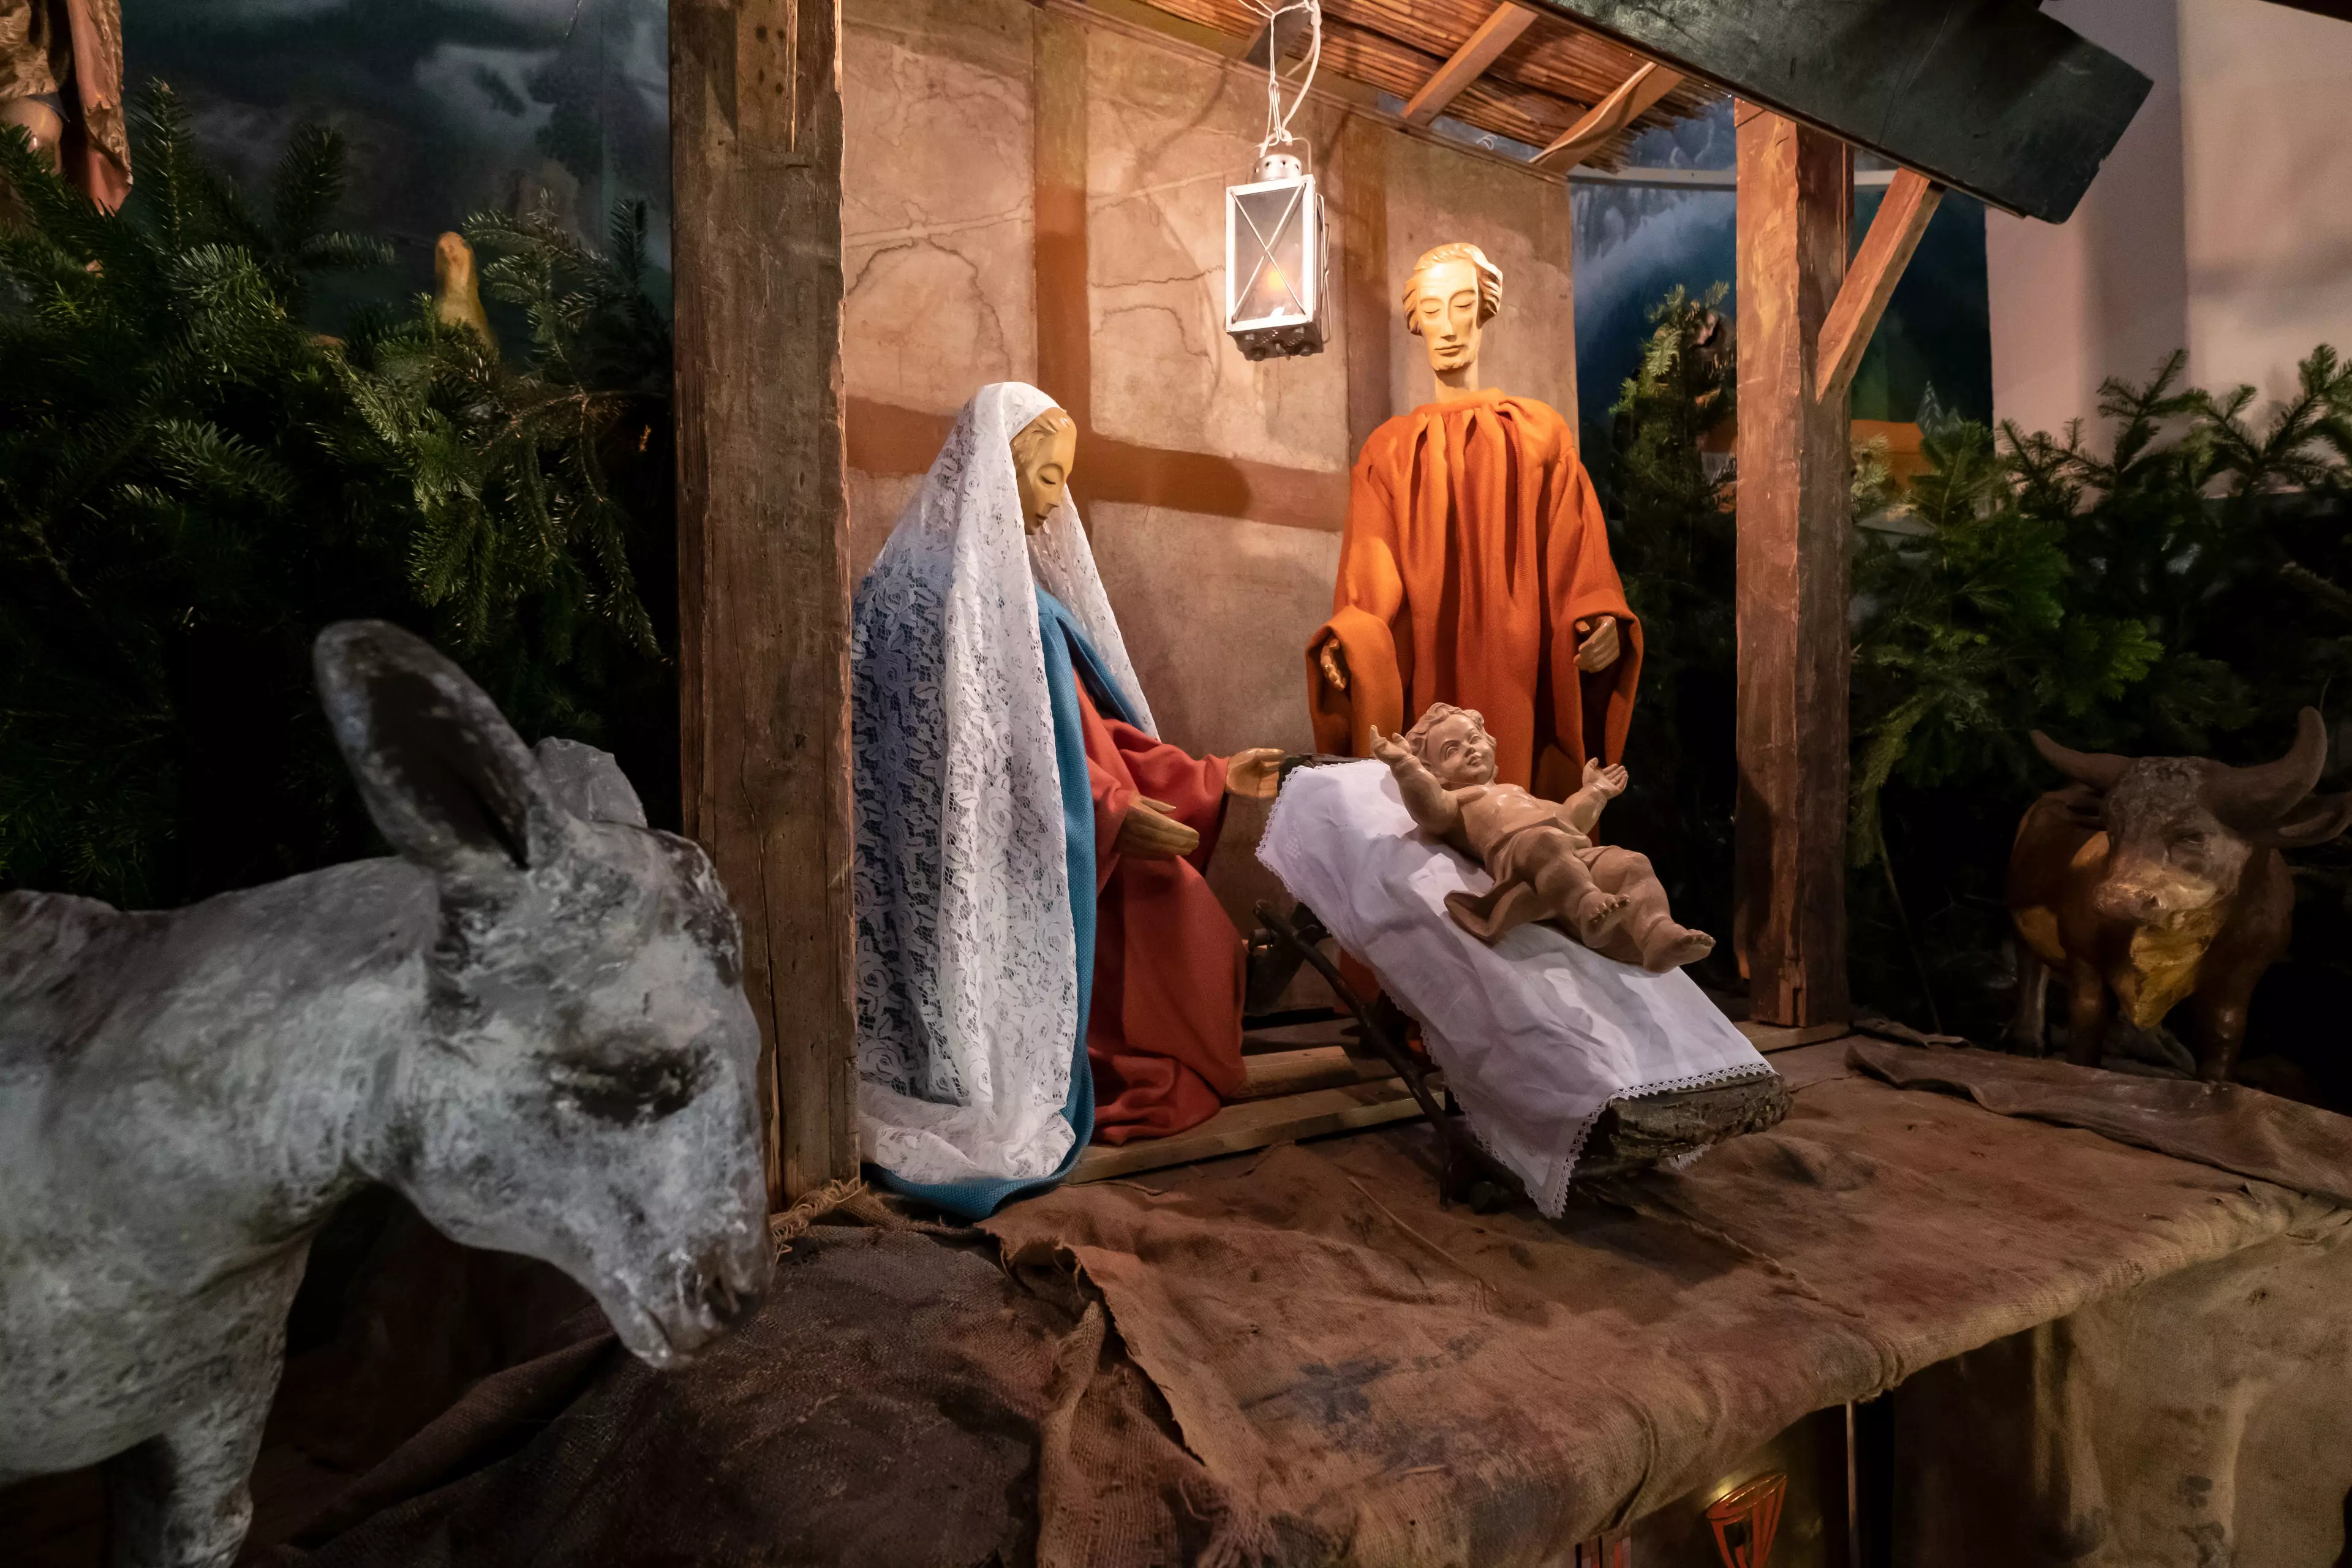 The traditional nativity.